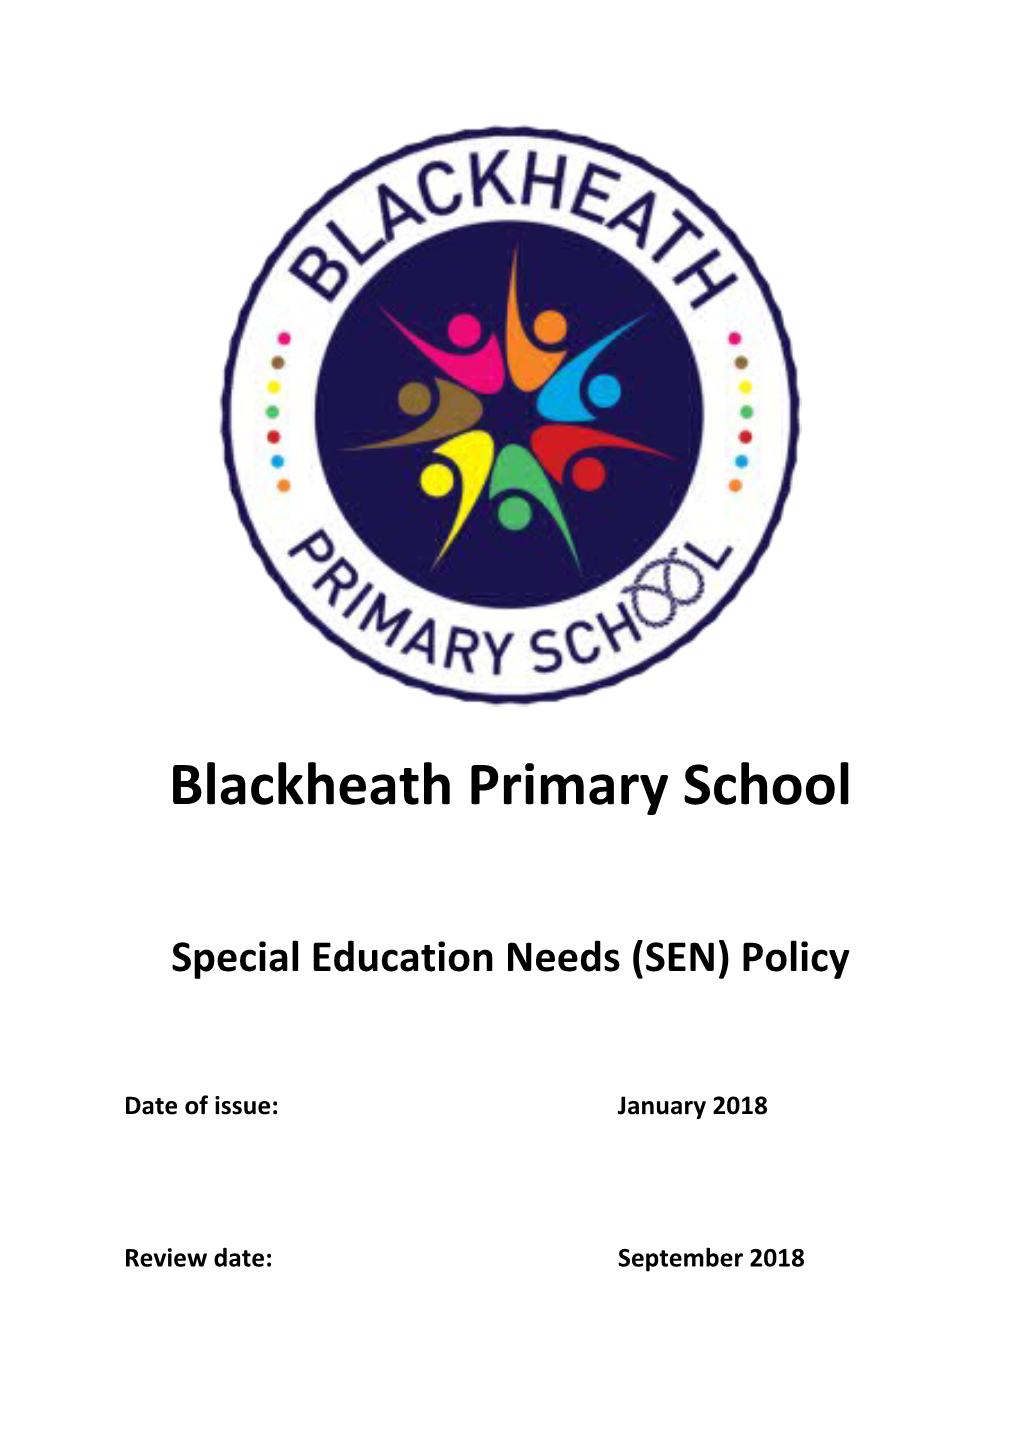 Special Education Needs (SEN) Policy